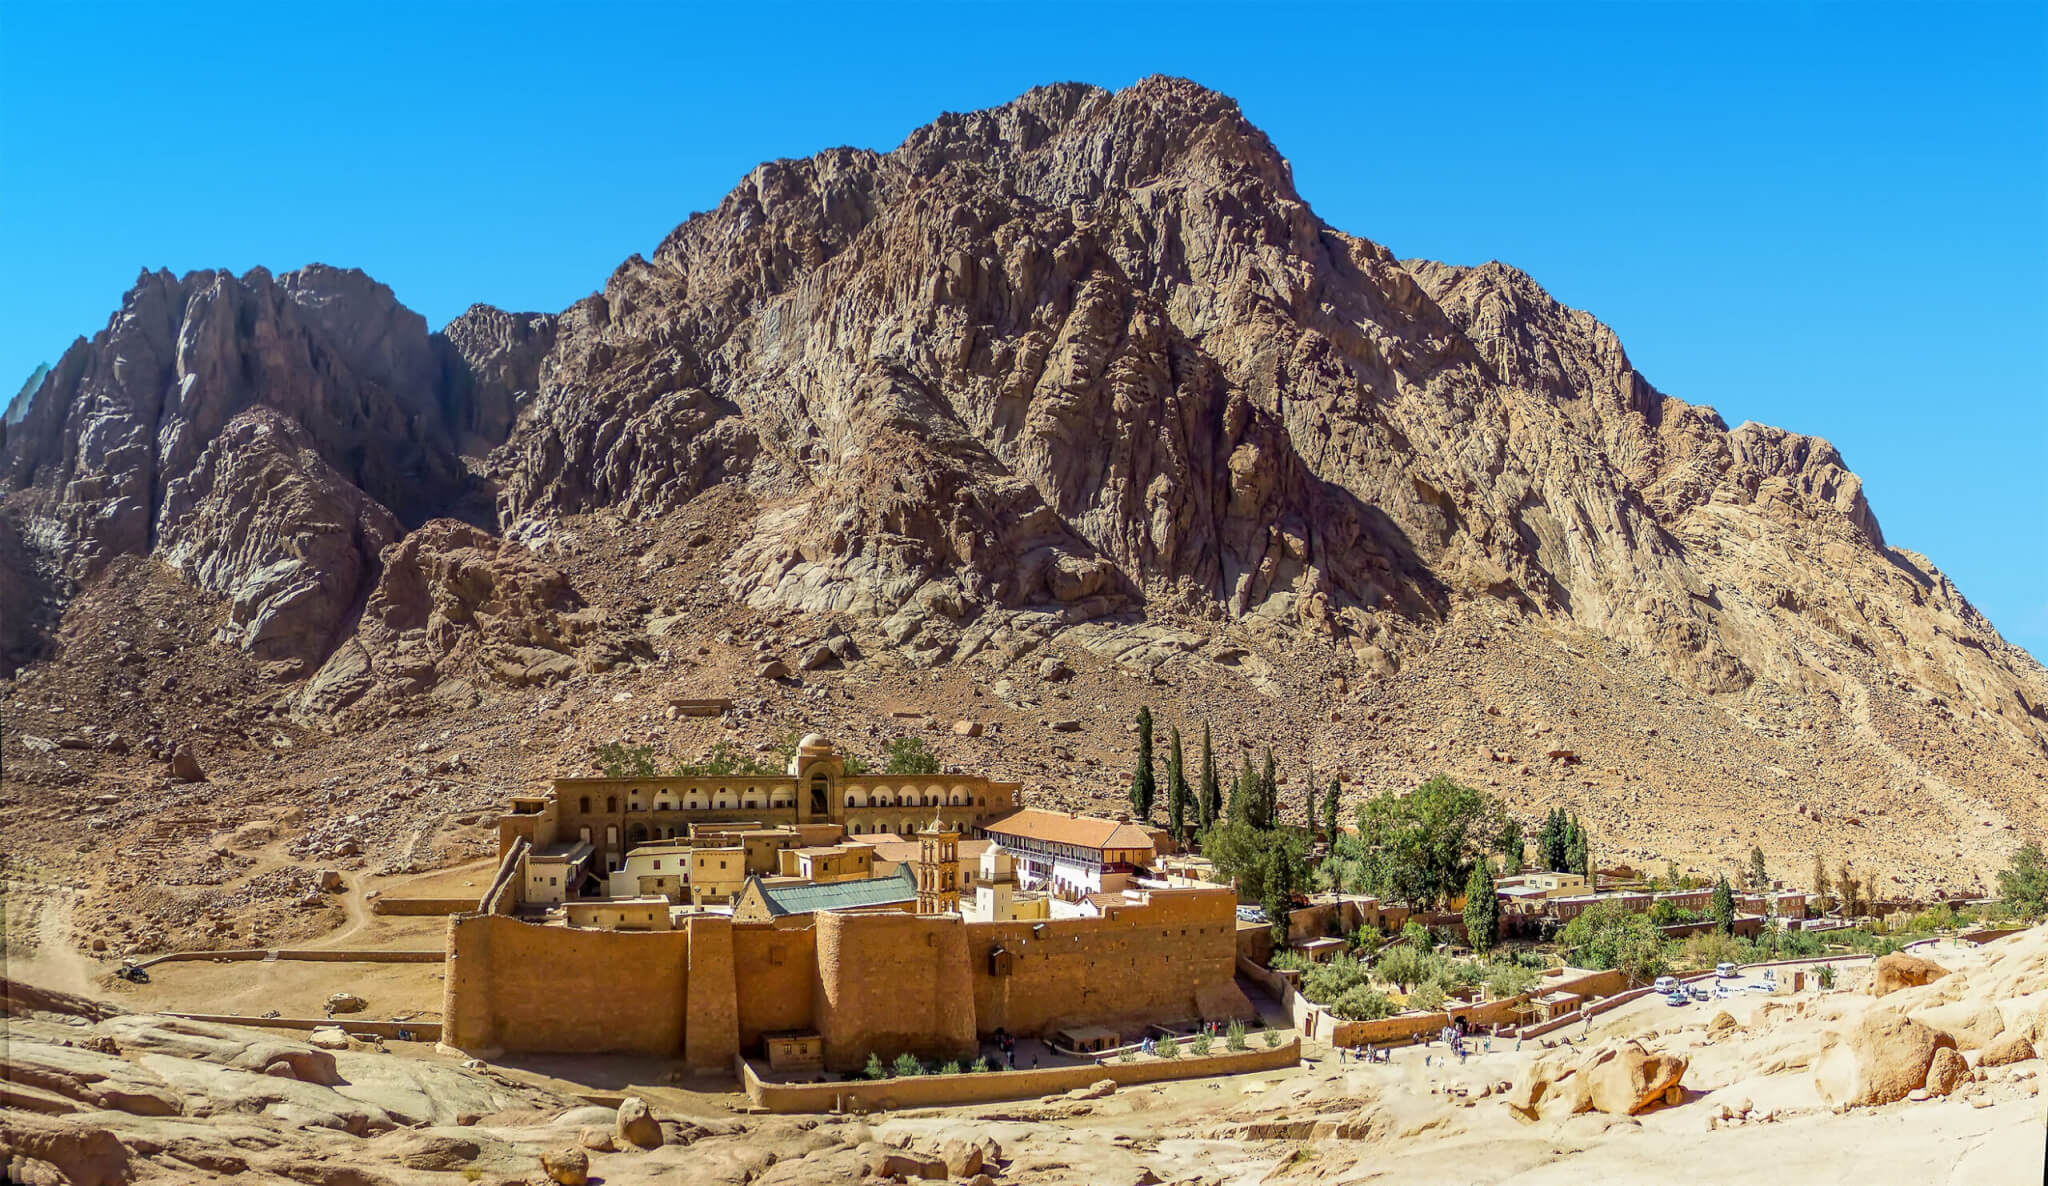 A panorama view of  Mount Sinai, Egypt and Saint Catherine's Monastery at the base of the mountain in summertime